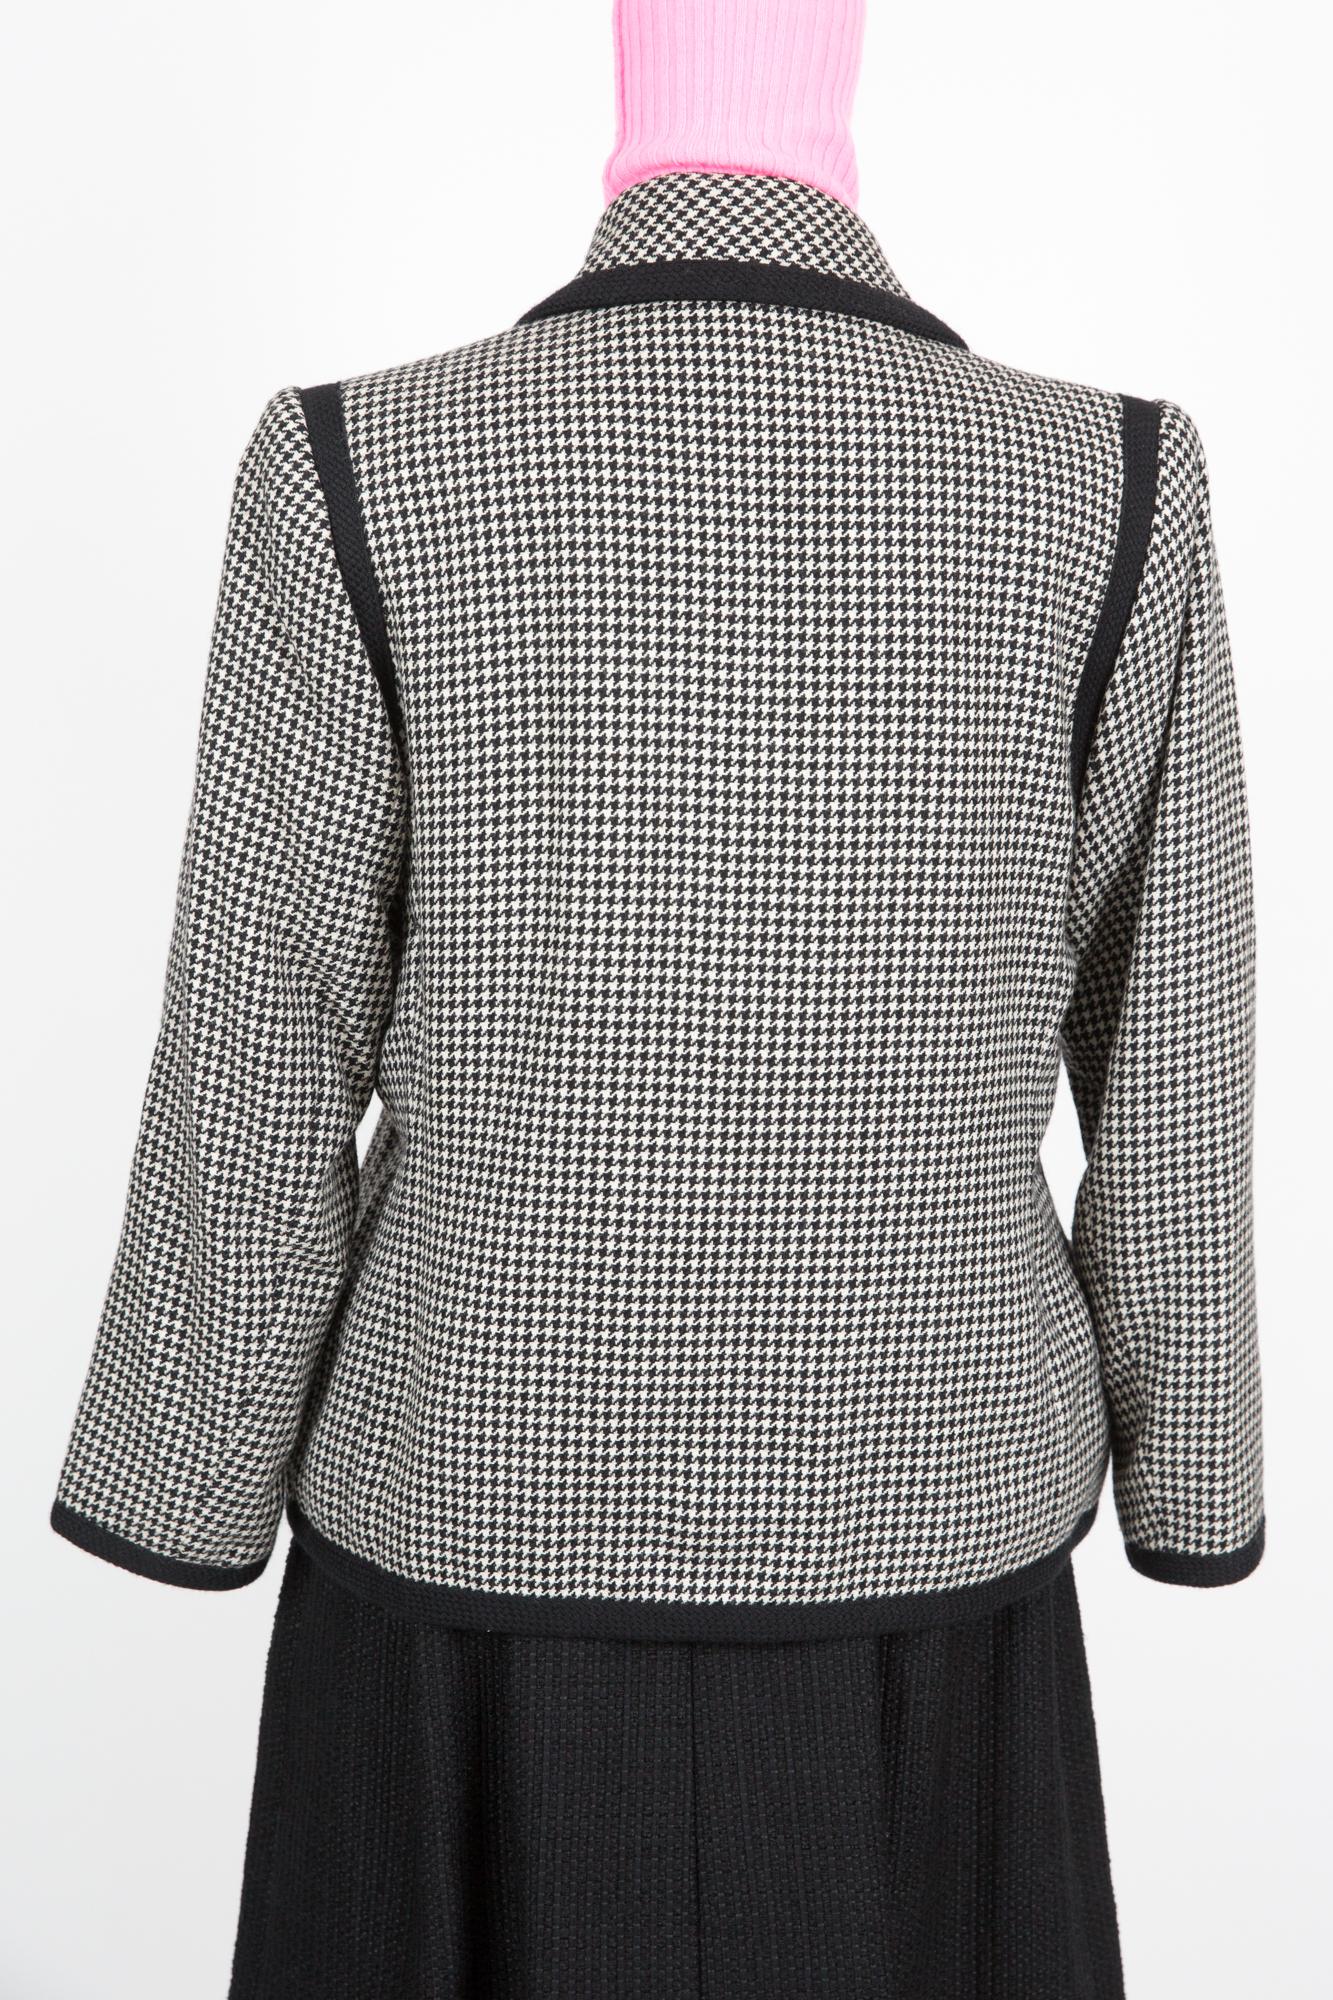 Yves Saint Laurent YSL black & white houndstooth jacket featuring a braided finishing at armholes and front, long sleeves. 
Circa 1990s
Composition: 100% wool
Estimated size 38fr/US6 /UK10
Made in France. 
In good vintage condition. 
We guarantee